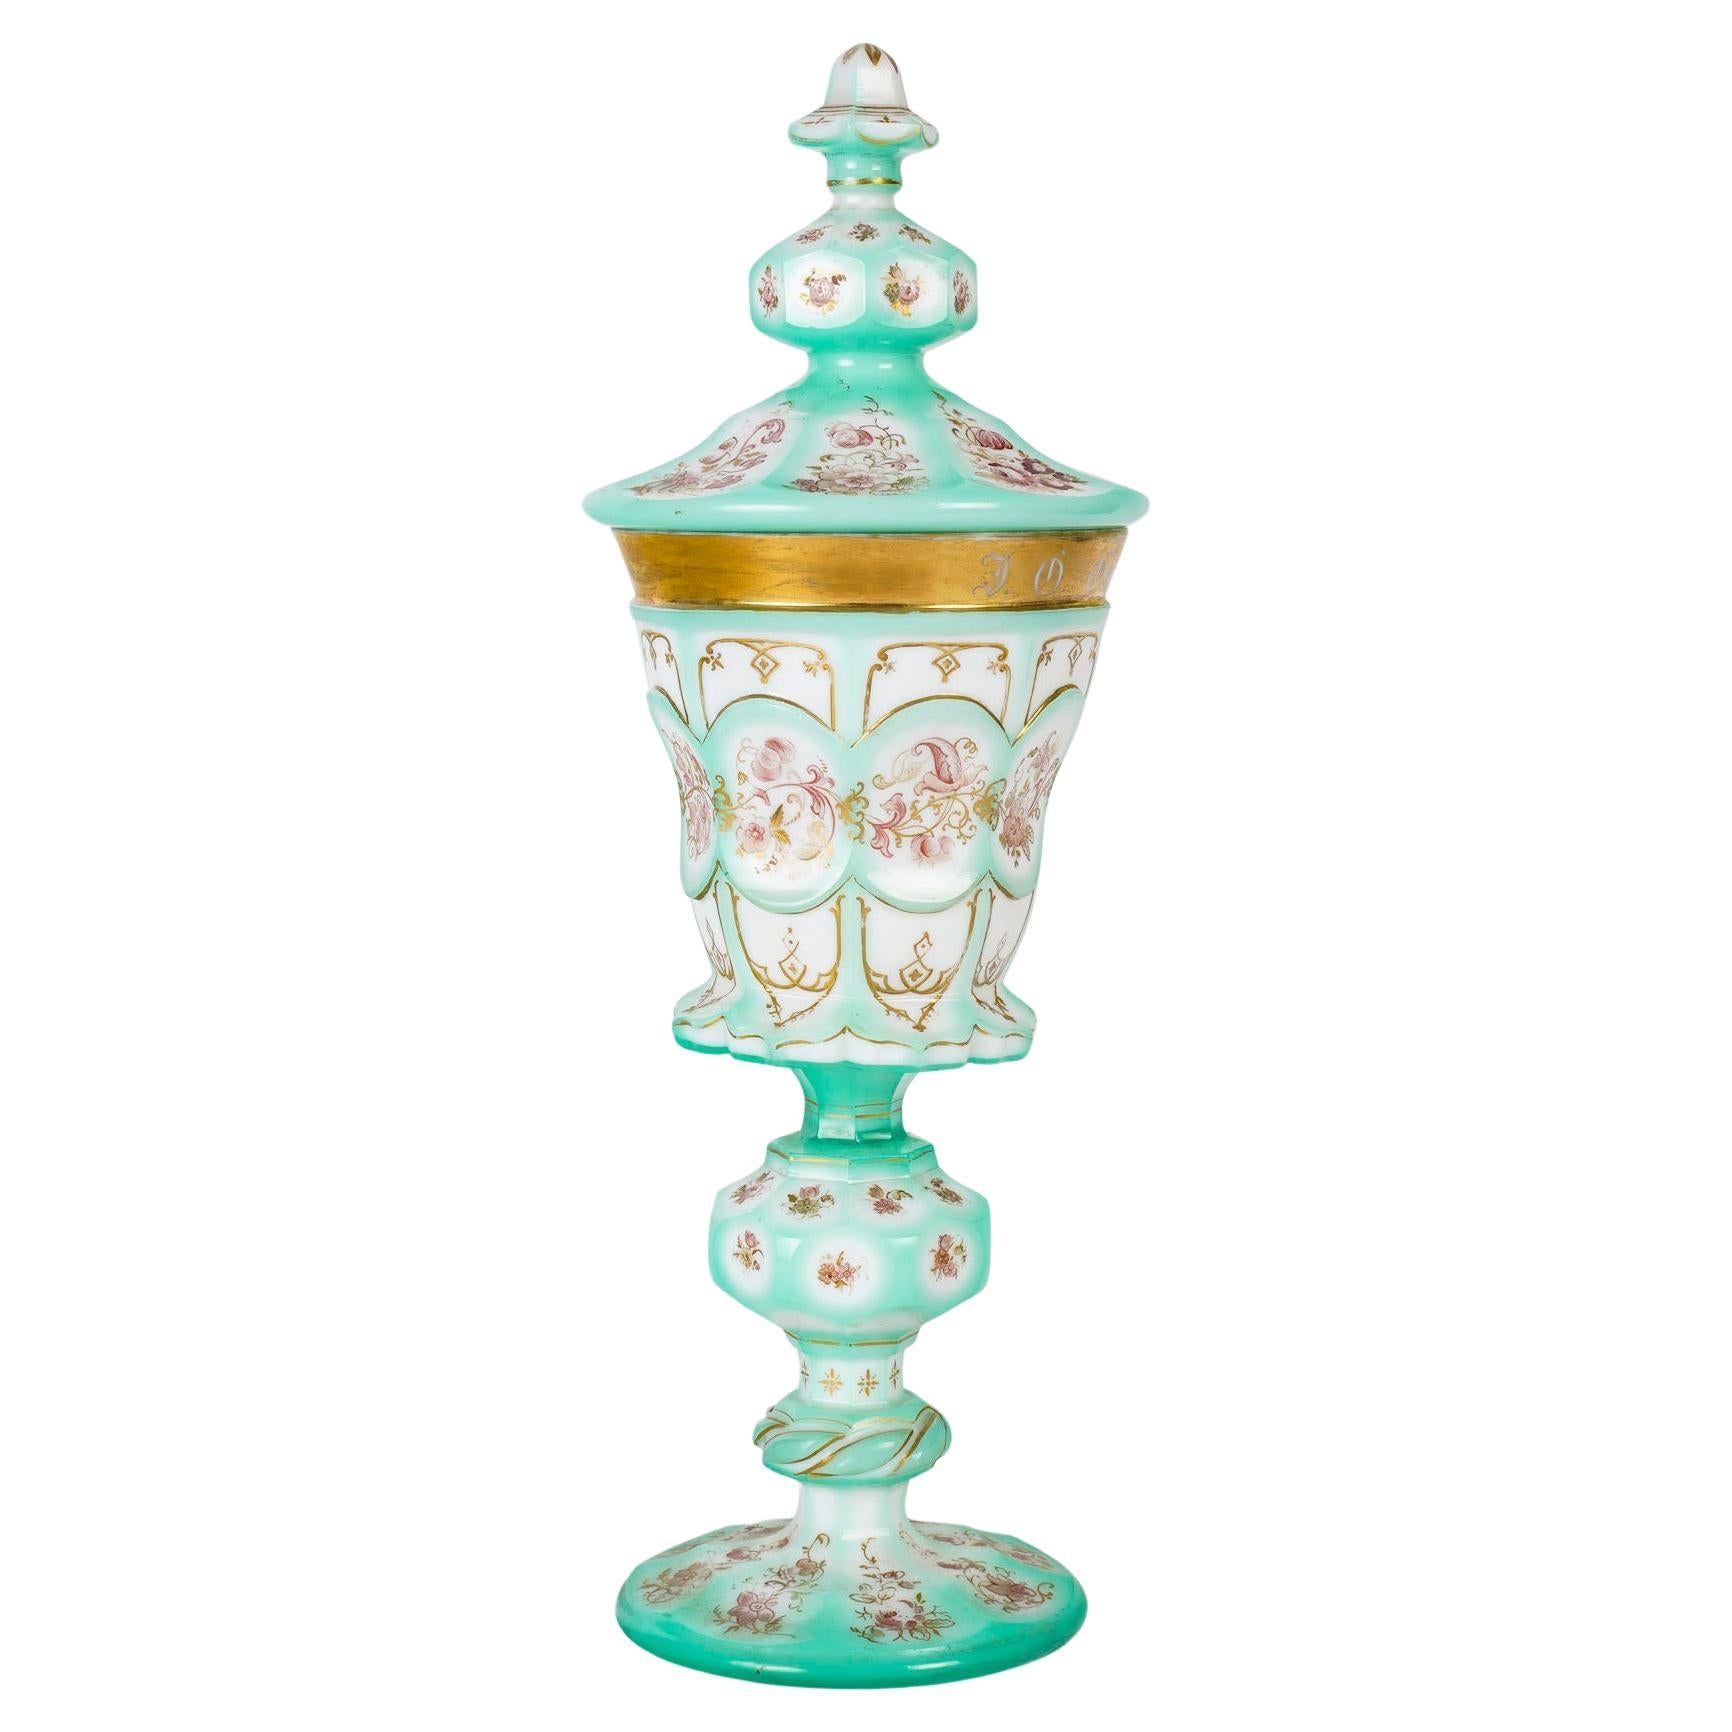 Large Goblet in Opaline Overlay, 19th Century, Napoleon III Period.